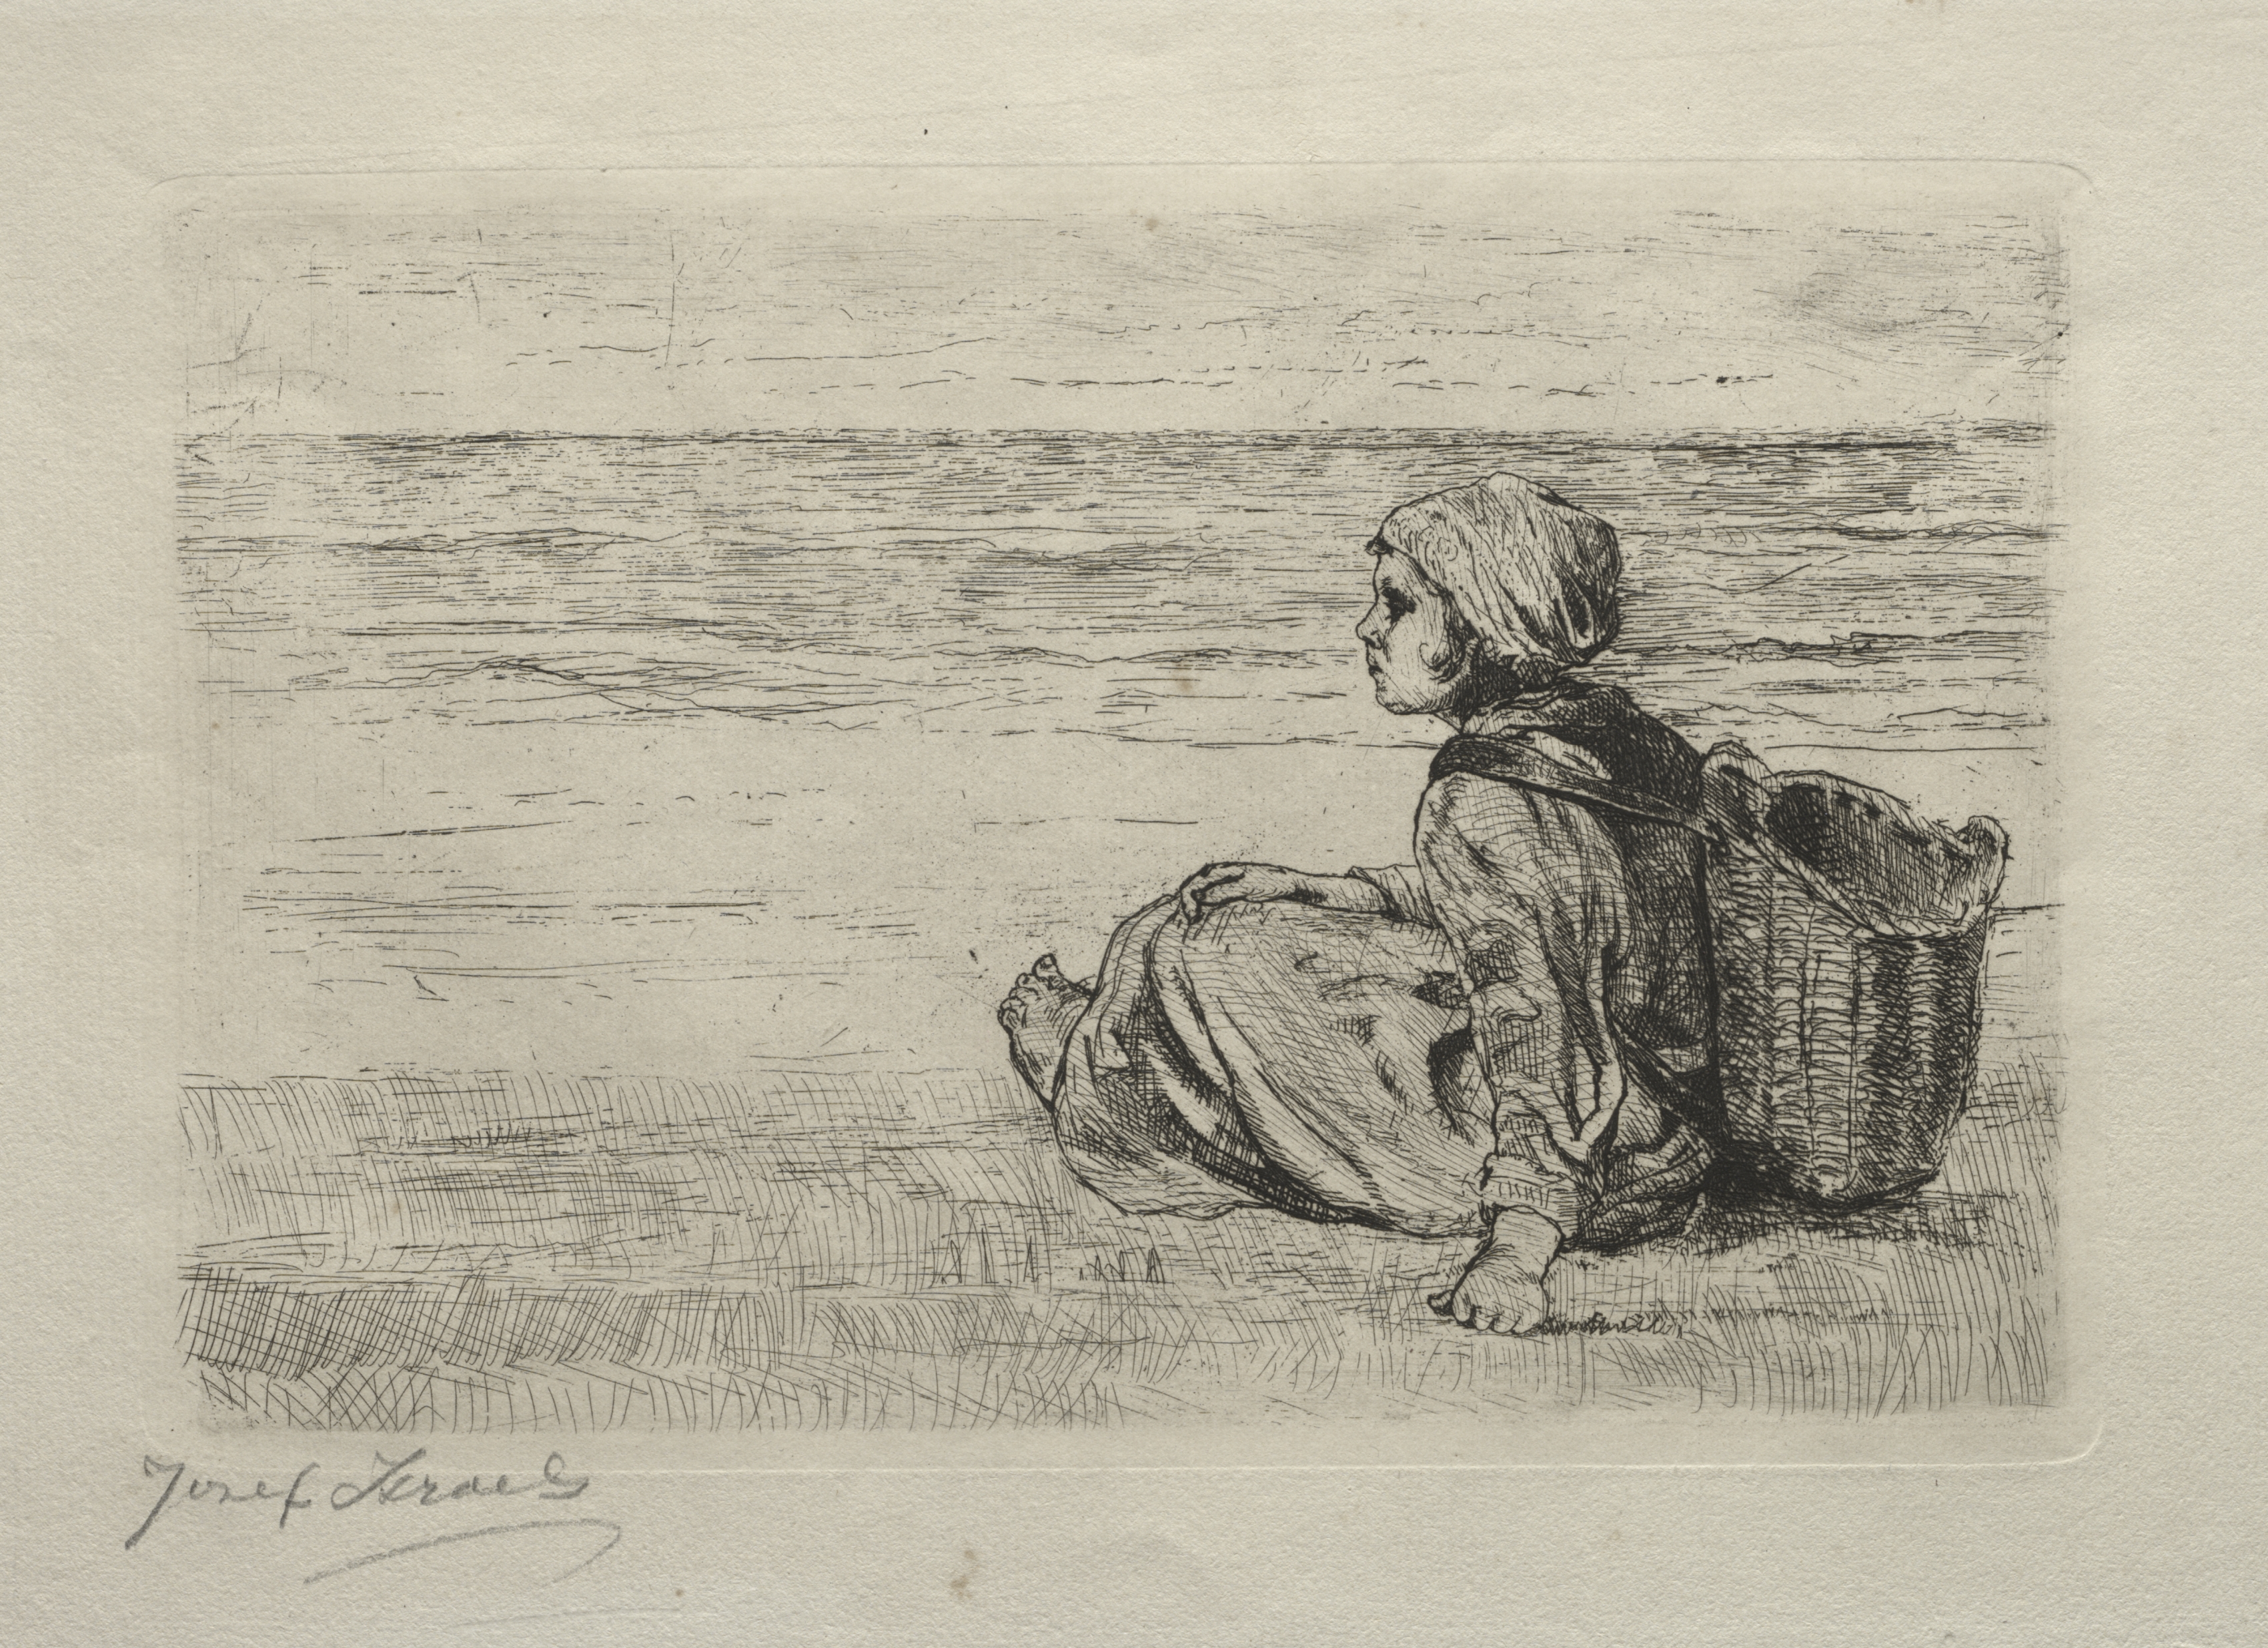 Girl with basket seated on the shore